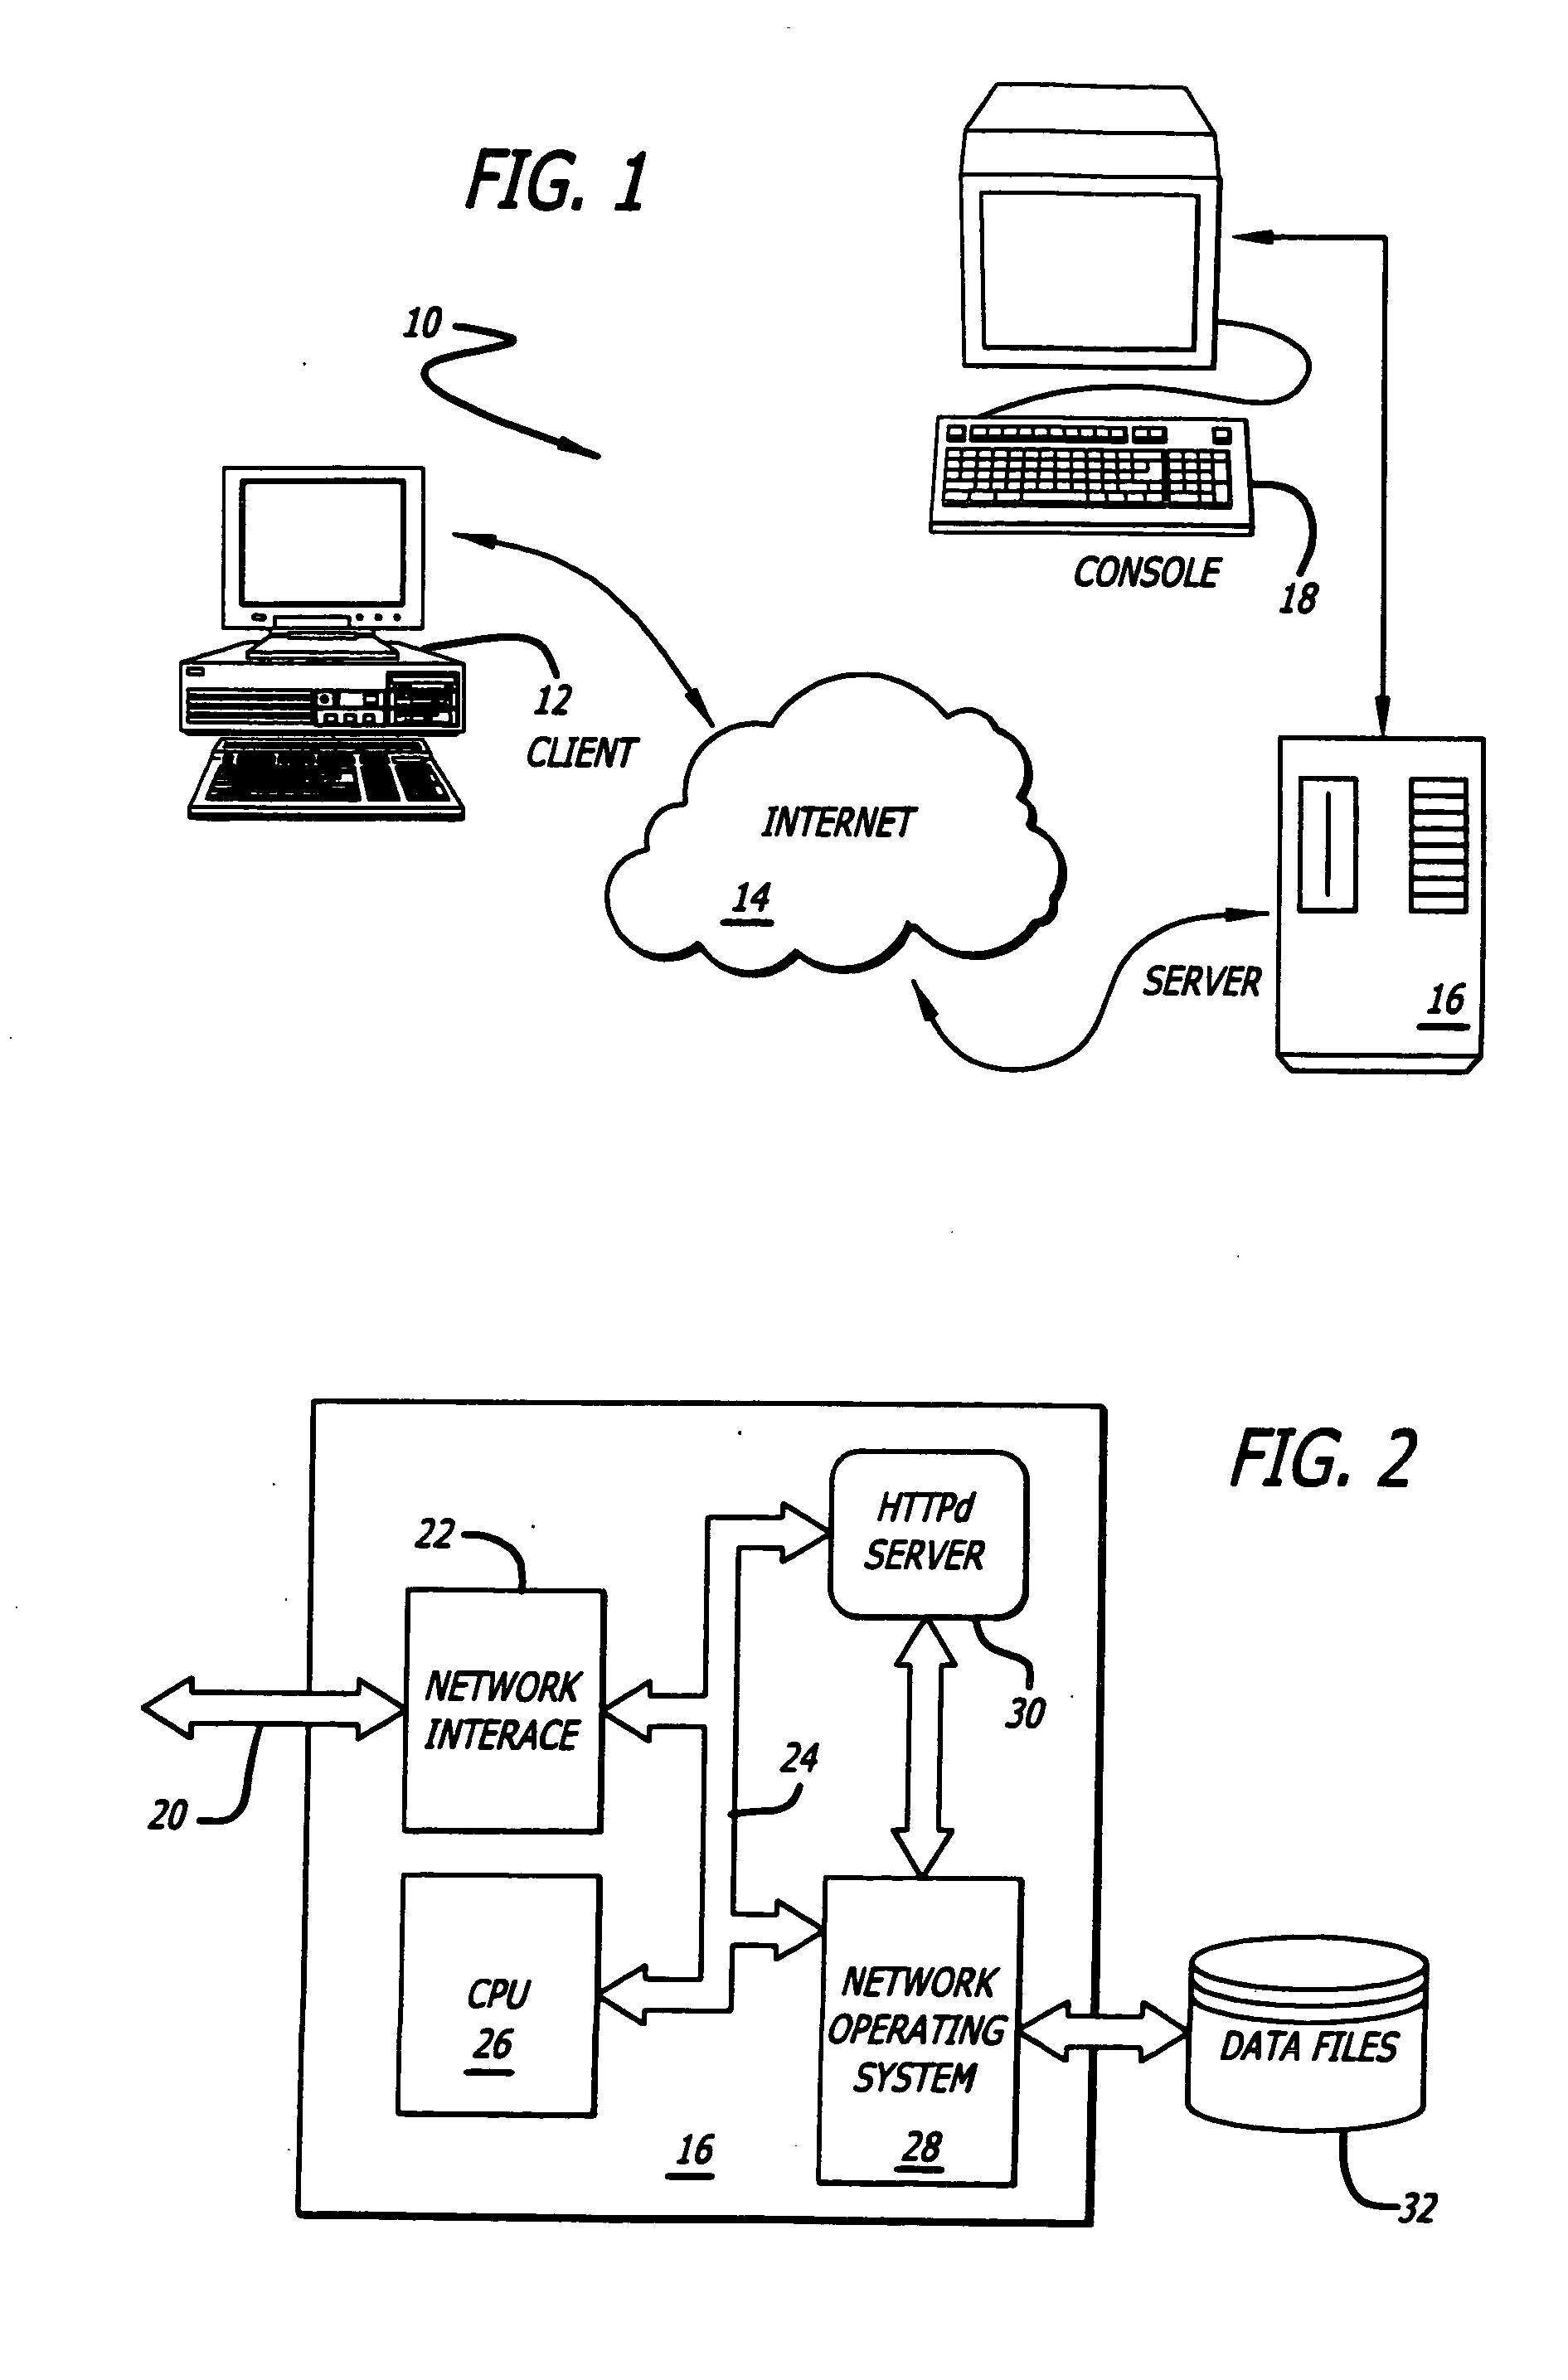 Method and apparatus for redirection of server external hyper-link references